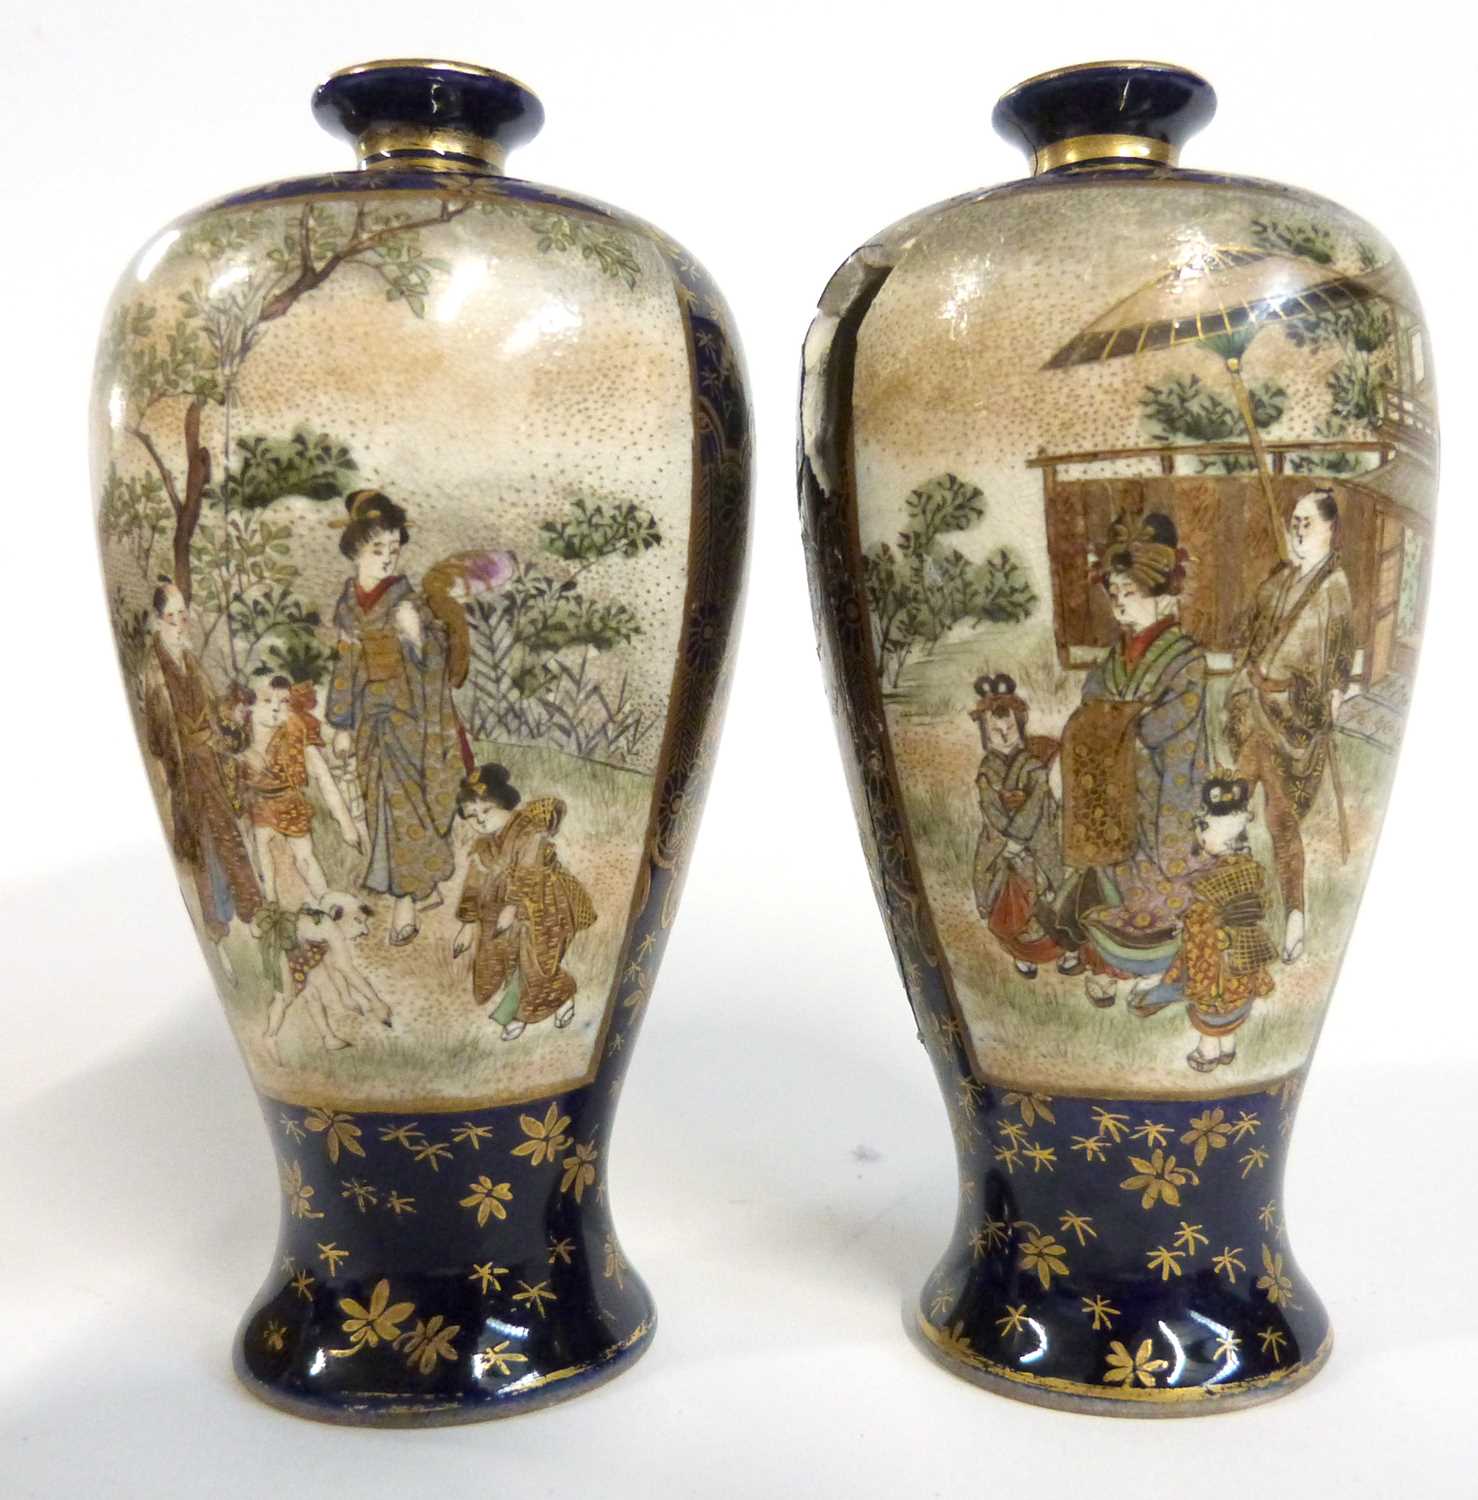 Wooden box containing two Japanese porcelain Satsuma ware vases with panels decorated in gilt in